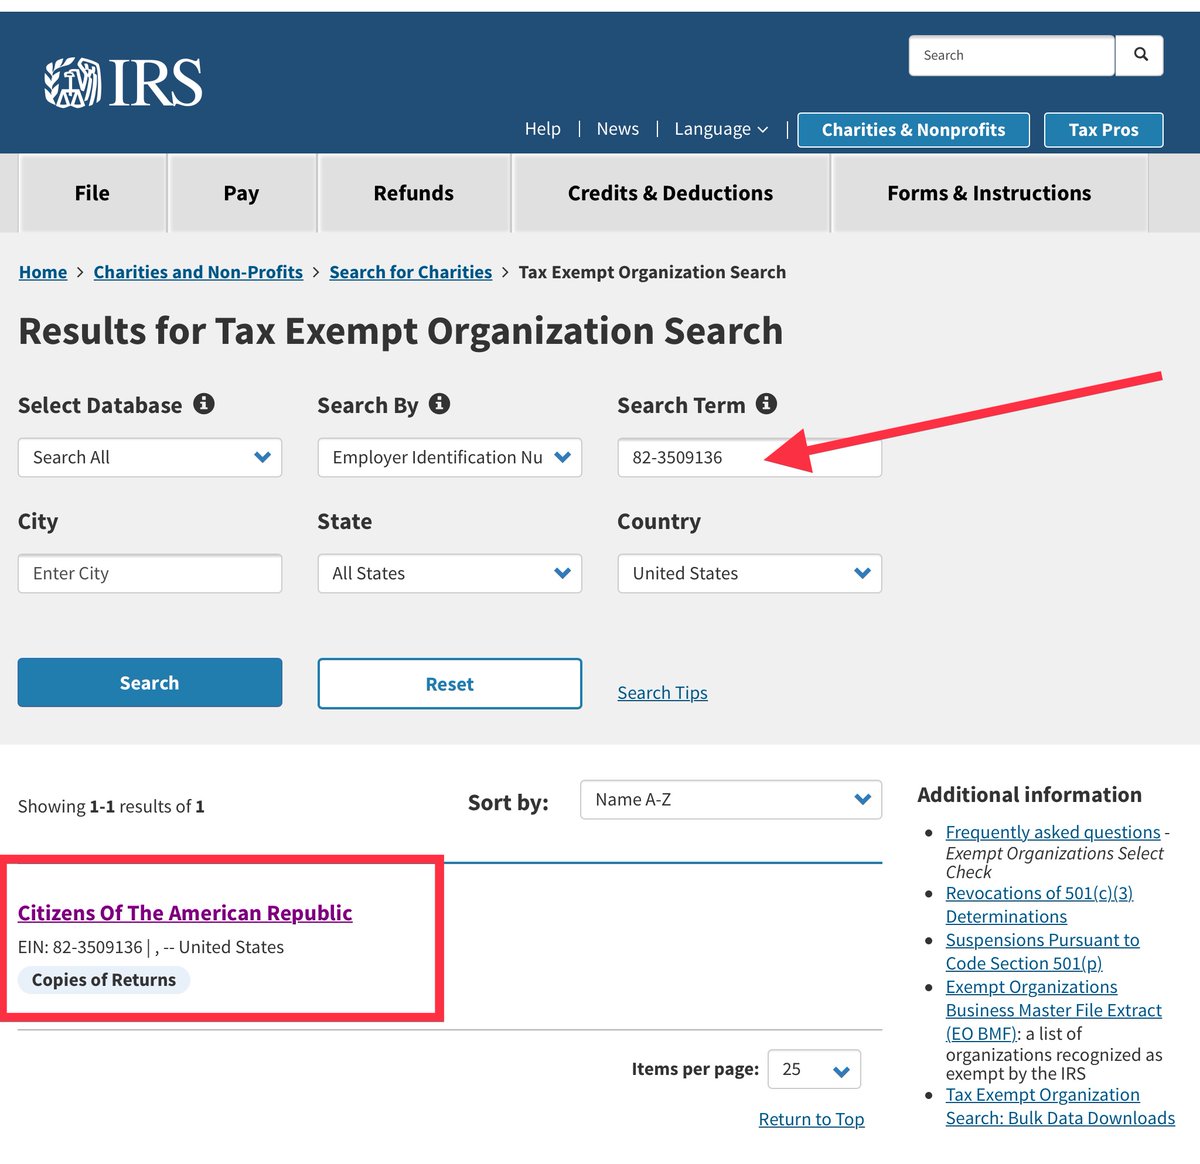 Must I really show you how to lawfully obtain the IRS-990 fling?OKIE DOKIEStep 1 acquire name: Citizens Of The American RepublicStep 2 acquire EIN 82-3509136Step 3 - search  https://www.irs.gov/charities-non-profits/tax-exempt-organization-searchStep 4 type in EIN # 82-3509136Step 5 - ENJOY https://apps.irs.gov/app/eos/displayAll.do?dispatchMethod=displayAllInfo&Id=1472844&ein=823509136&country=US&deductibility=all&dispatchMethod=searchAll&isDescending=false&city=&ein1=82-3509136&postDateFrom=&exemptTypeCode=al&submitName=Search&sortColumn=orgName&totalResults=1&names=&resultsPerPage=25&indexOfFirstRow=0&postDateTo=&state=All+States